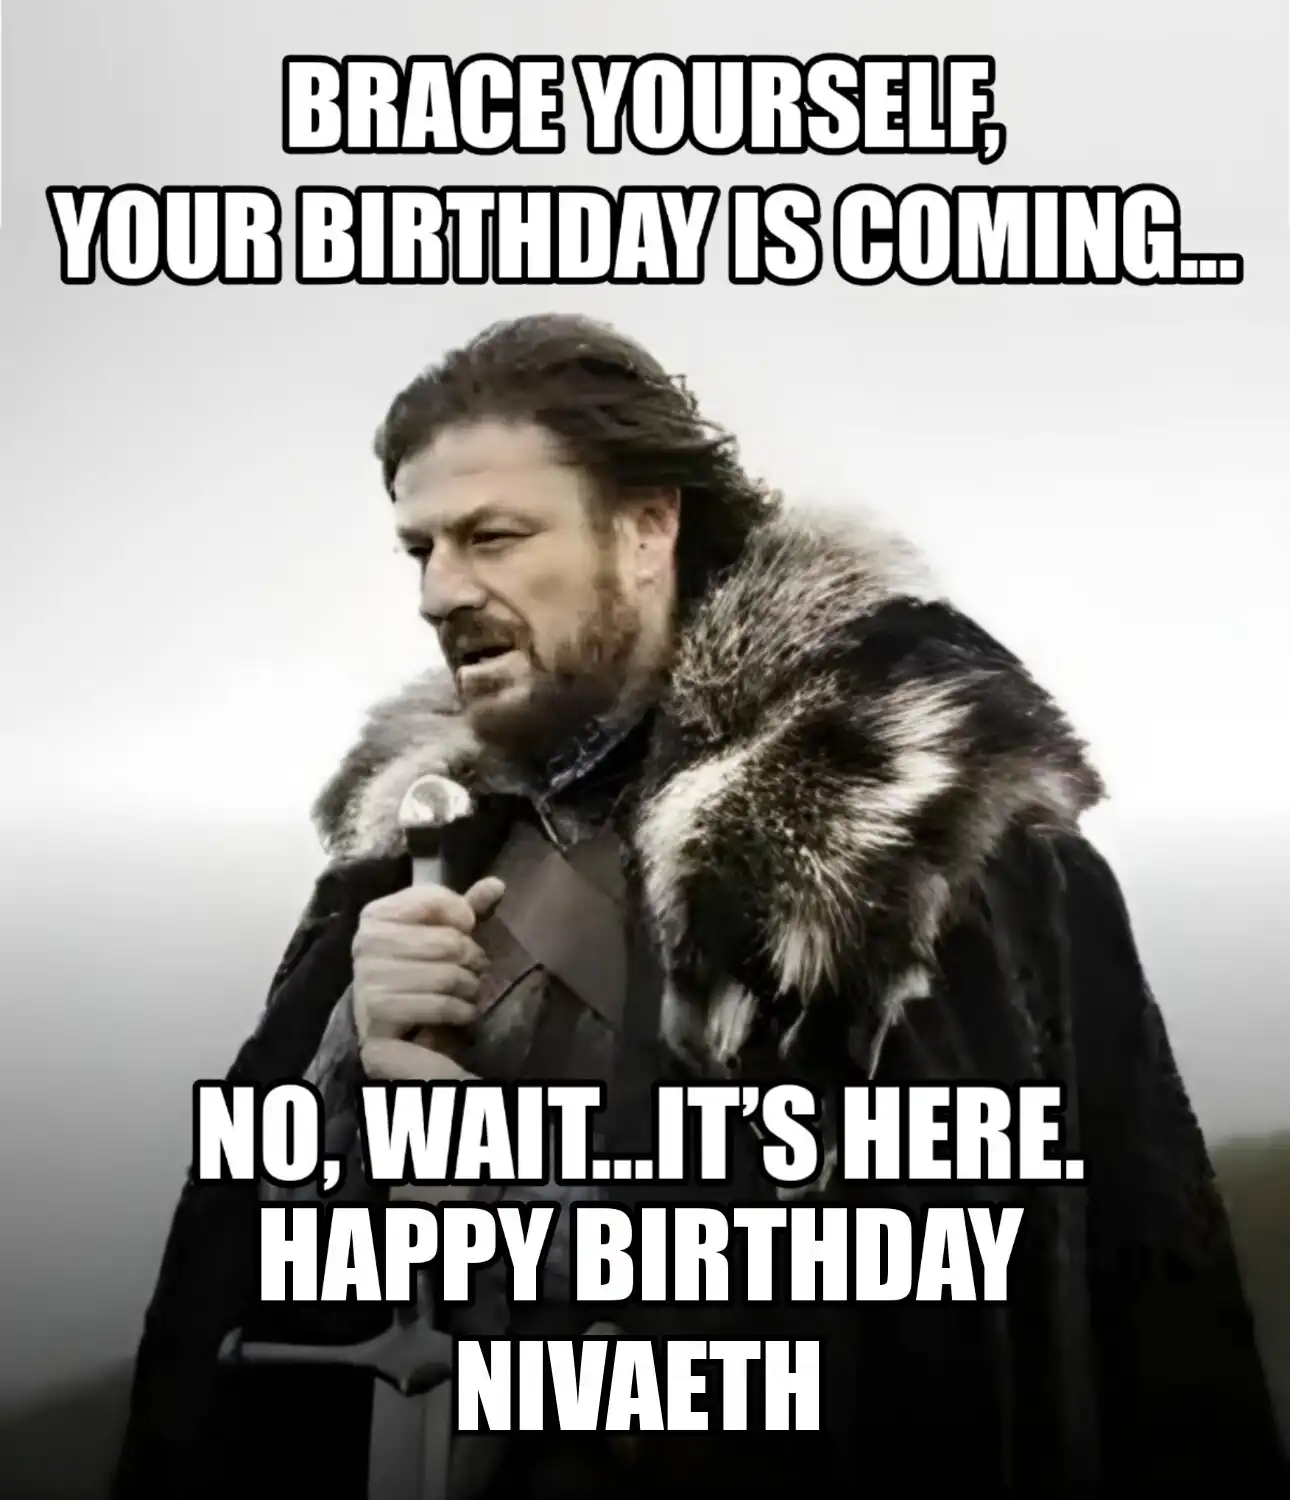 Happy Birthday Nivaeth Brace Yourself Your Birthday Is Coming Meme